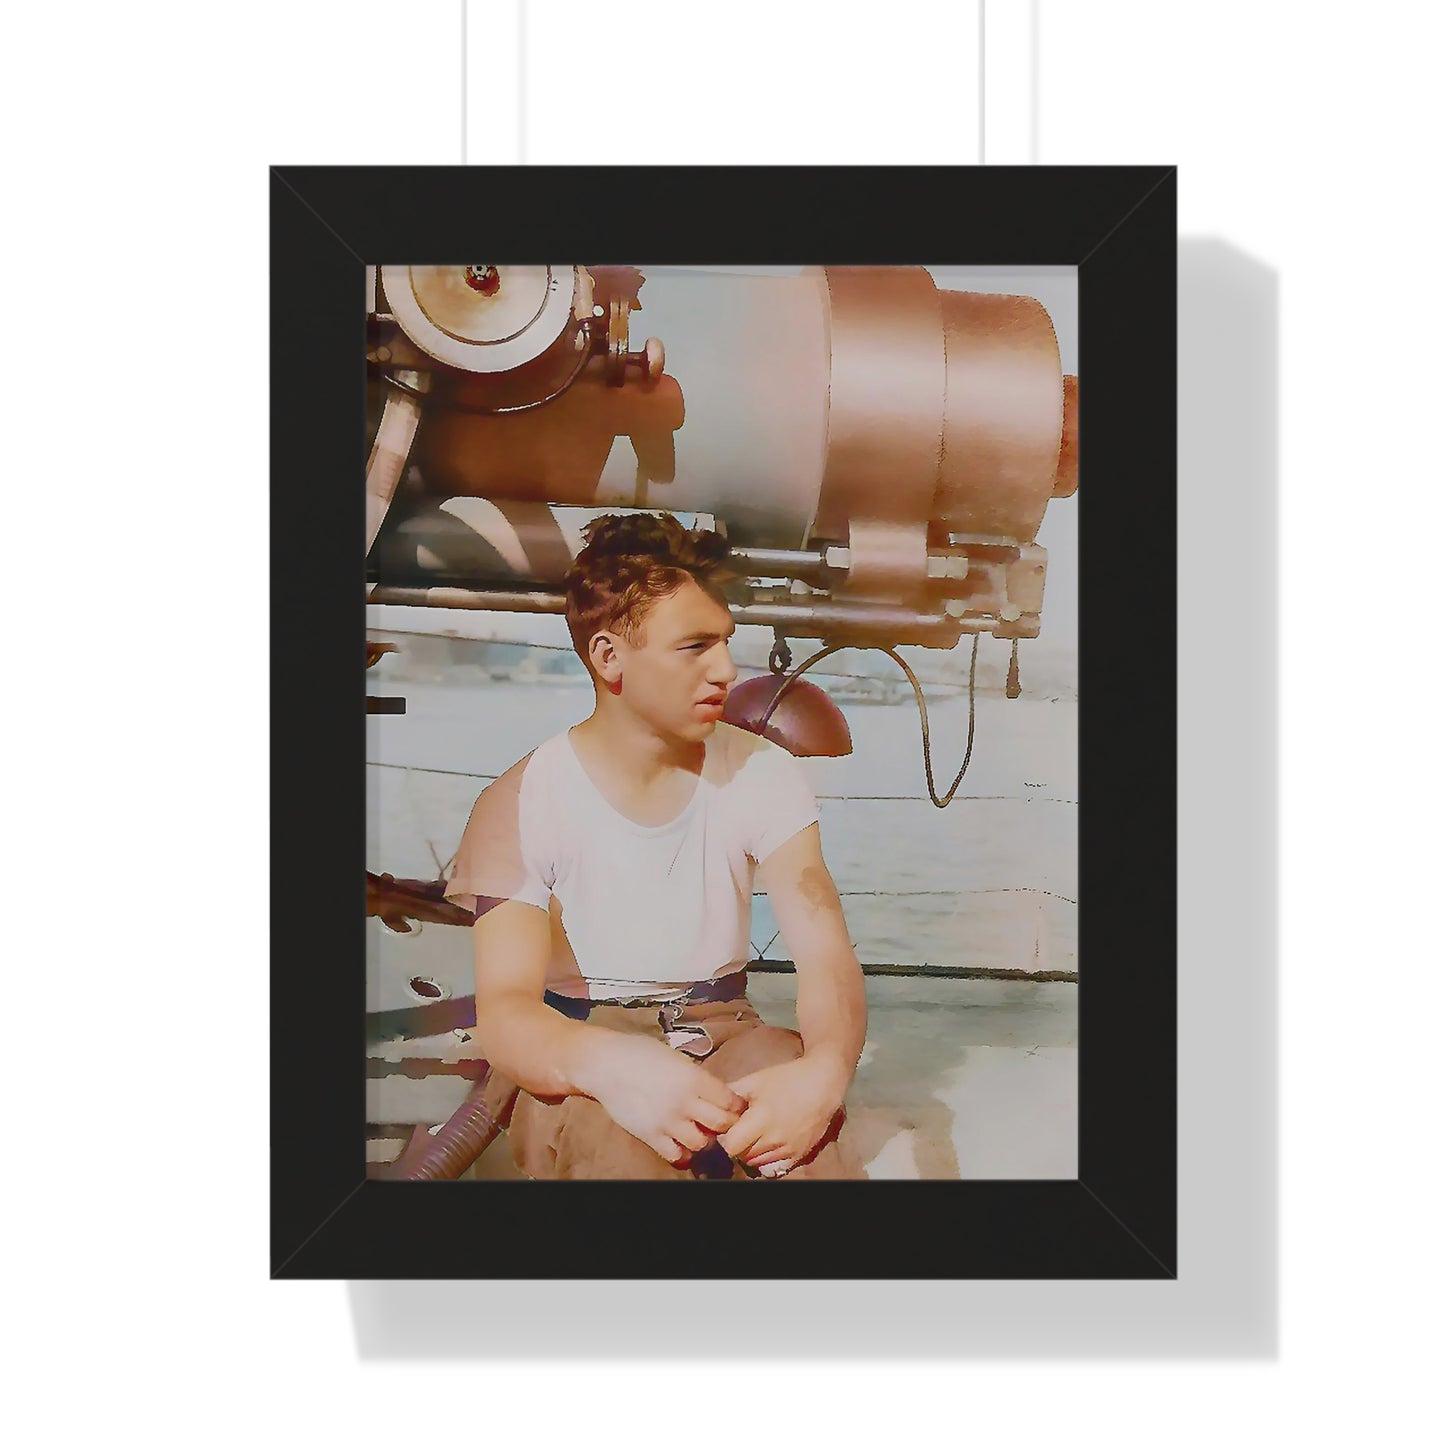 celibataire 026 | Framed Poster Vintage Sailor Photo Ship WWII Tired Young Man Ocean Gay LGBTQ 